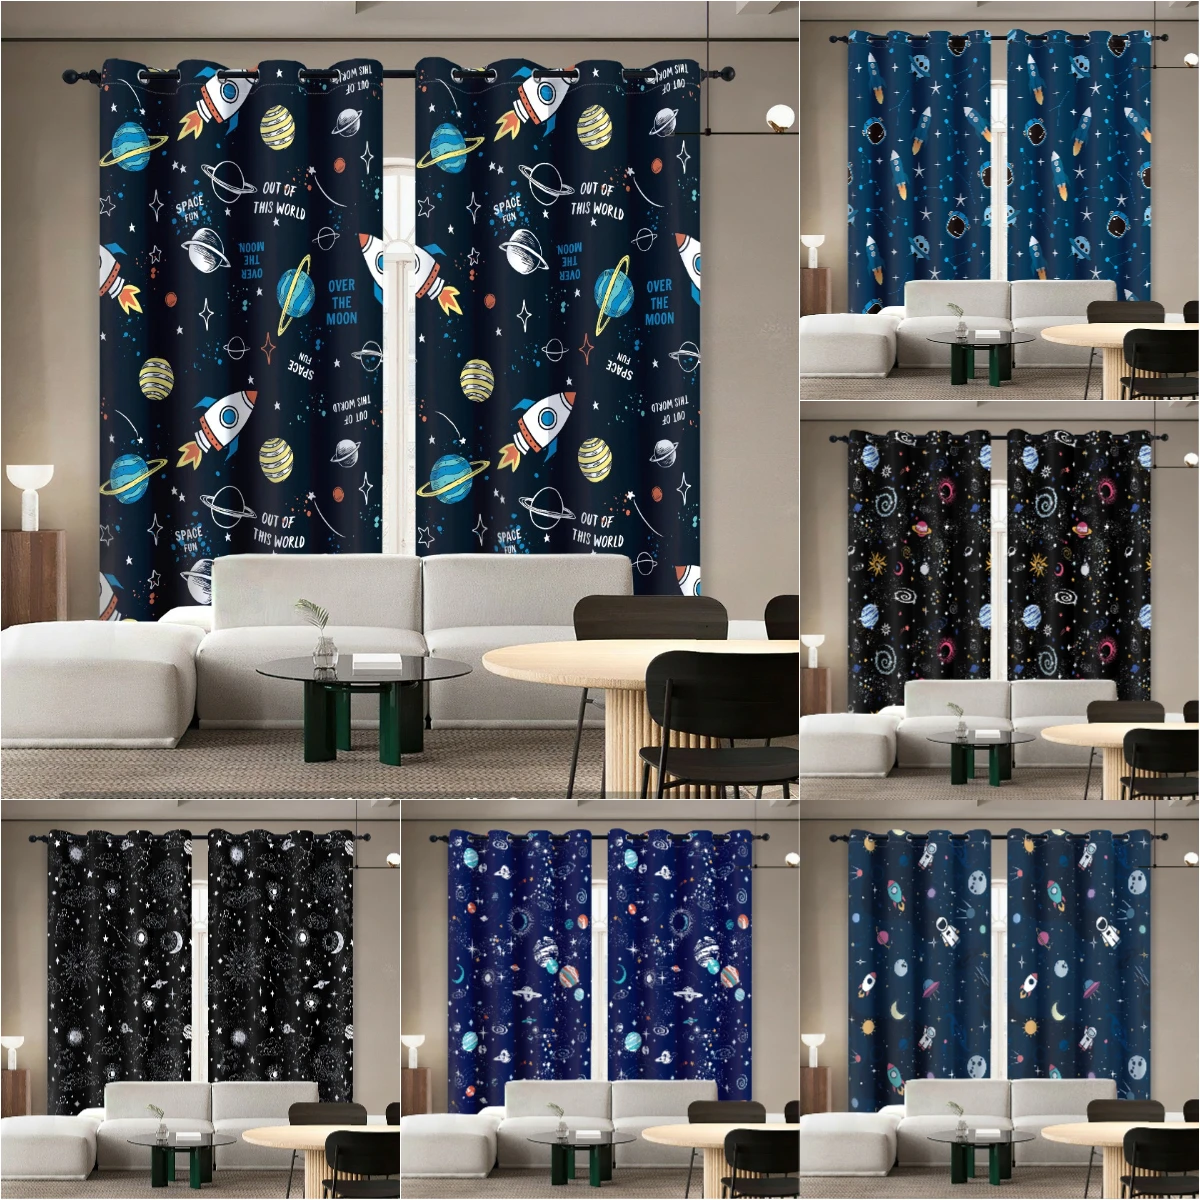 

Cute Astronaut Window Curtains Spaceship Rocket Moon Eyelet Blackout Curtain Galaxy Star Outer Space Drapes for Kids Room Decor